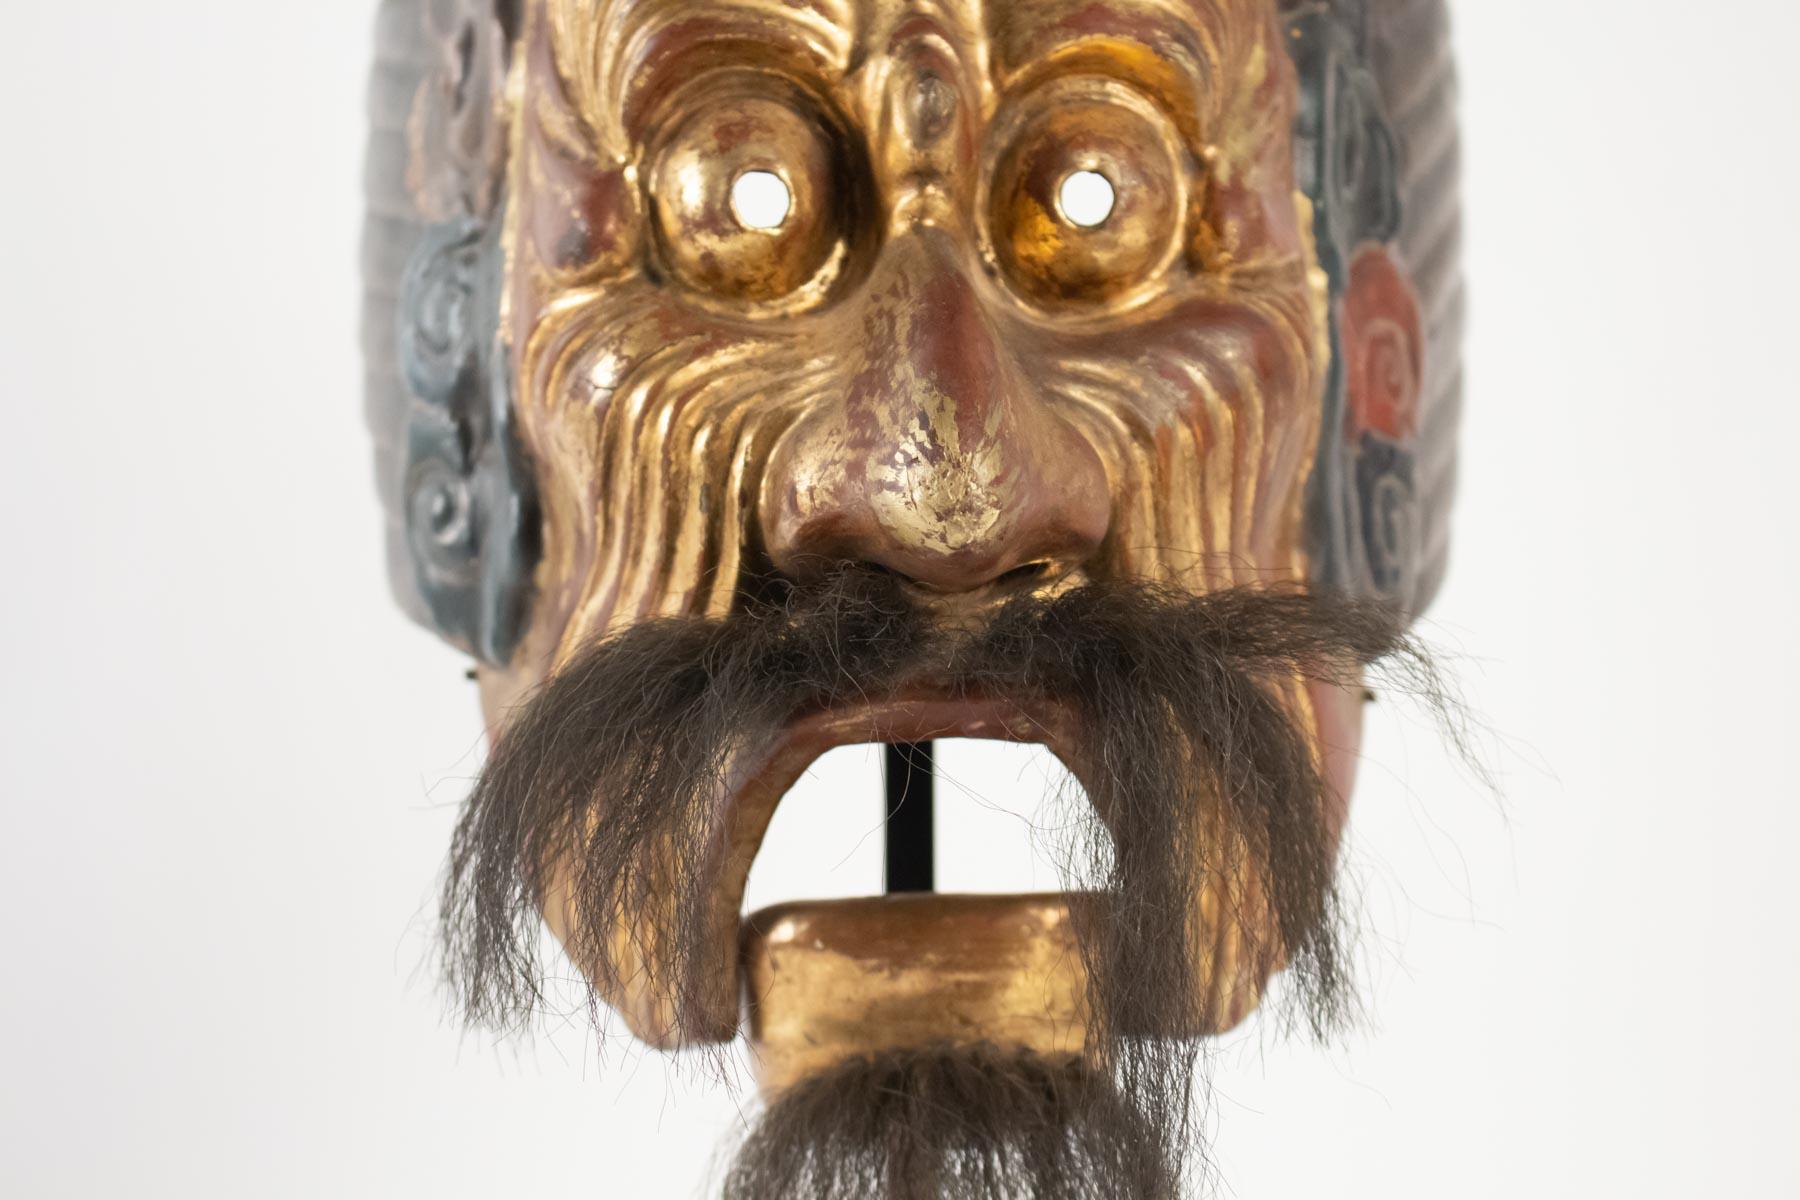 Asian Gilded Wood Mask, Polychrome, Japan, Says of the Imperial Dance of Bugaku Dances